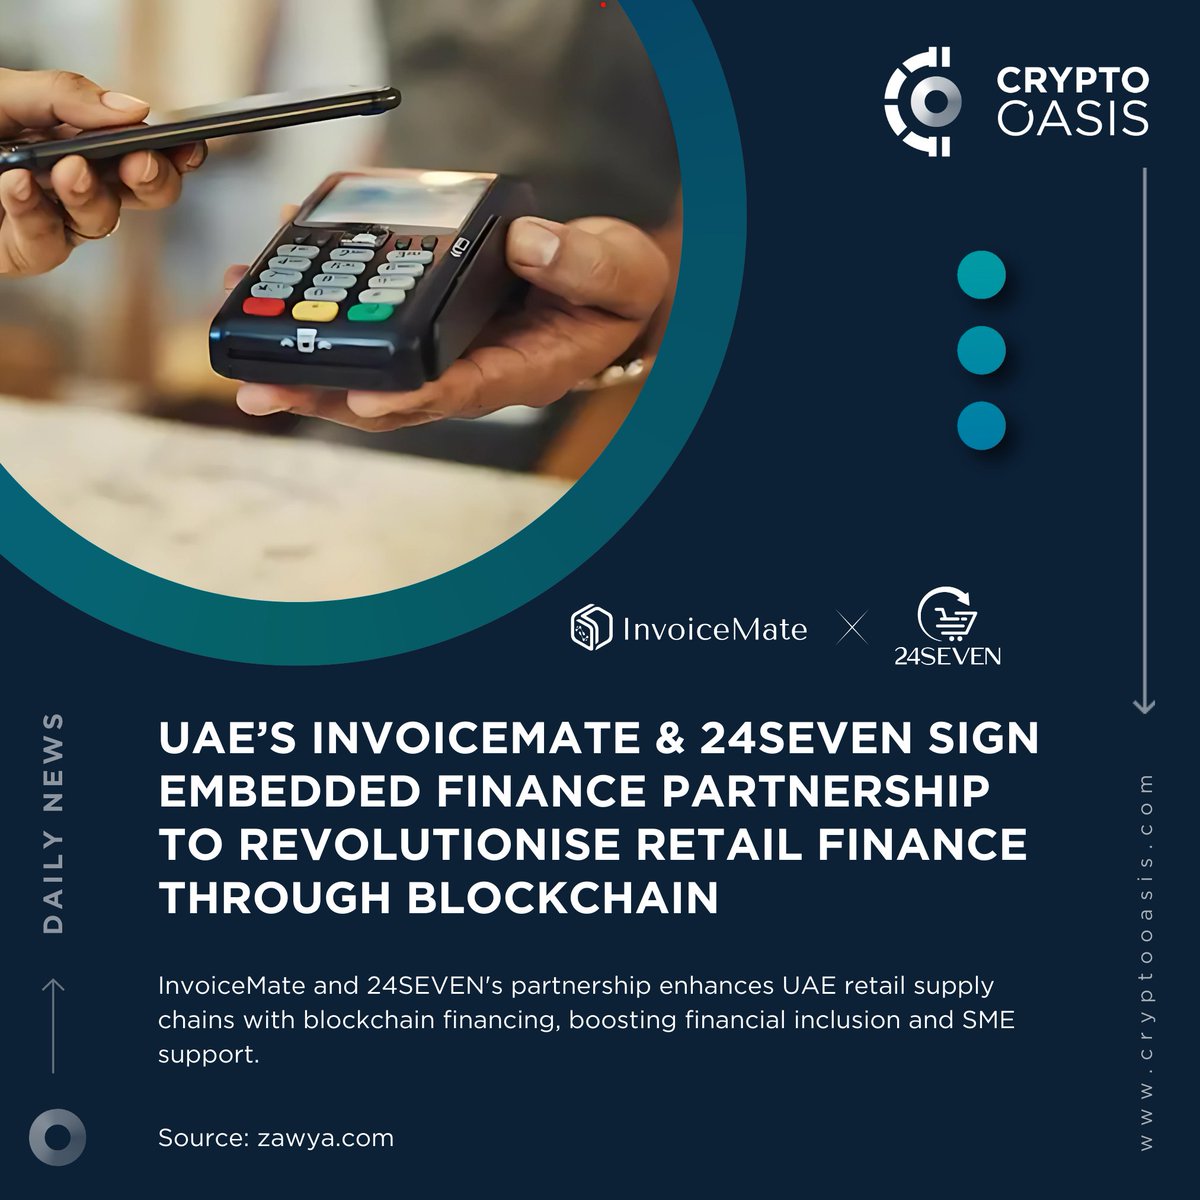 📢 Crypto Oasis Daily News @MateInvoice and #24SEVEN have partnered to enhance the retail supply chain across the #UAE, aiming to support #SMEs by integrating retail data with #blockchain financing solutions. tinyurl.com/3r9453y7 @zawya